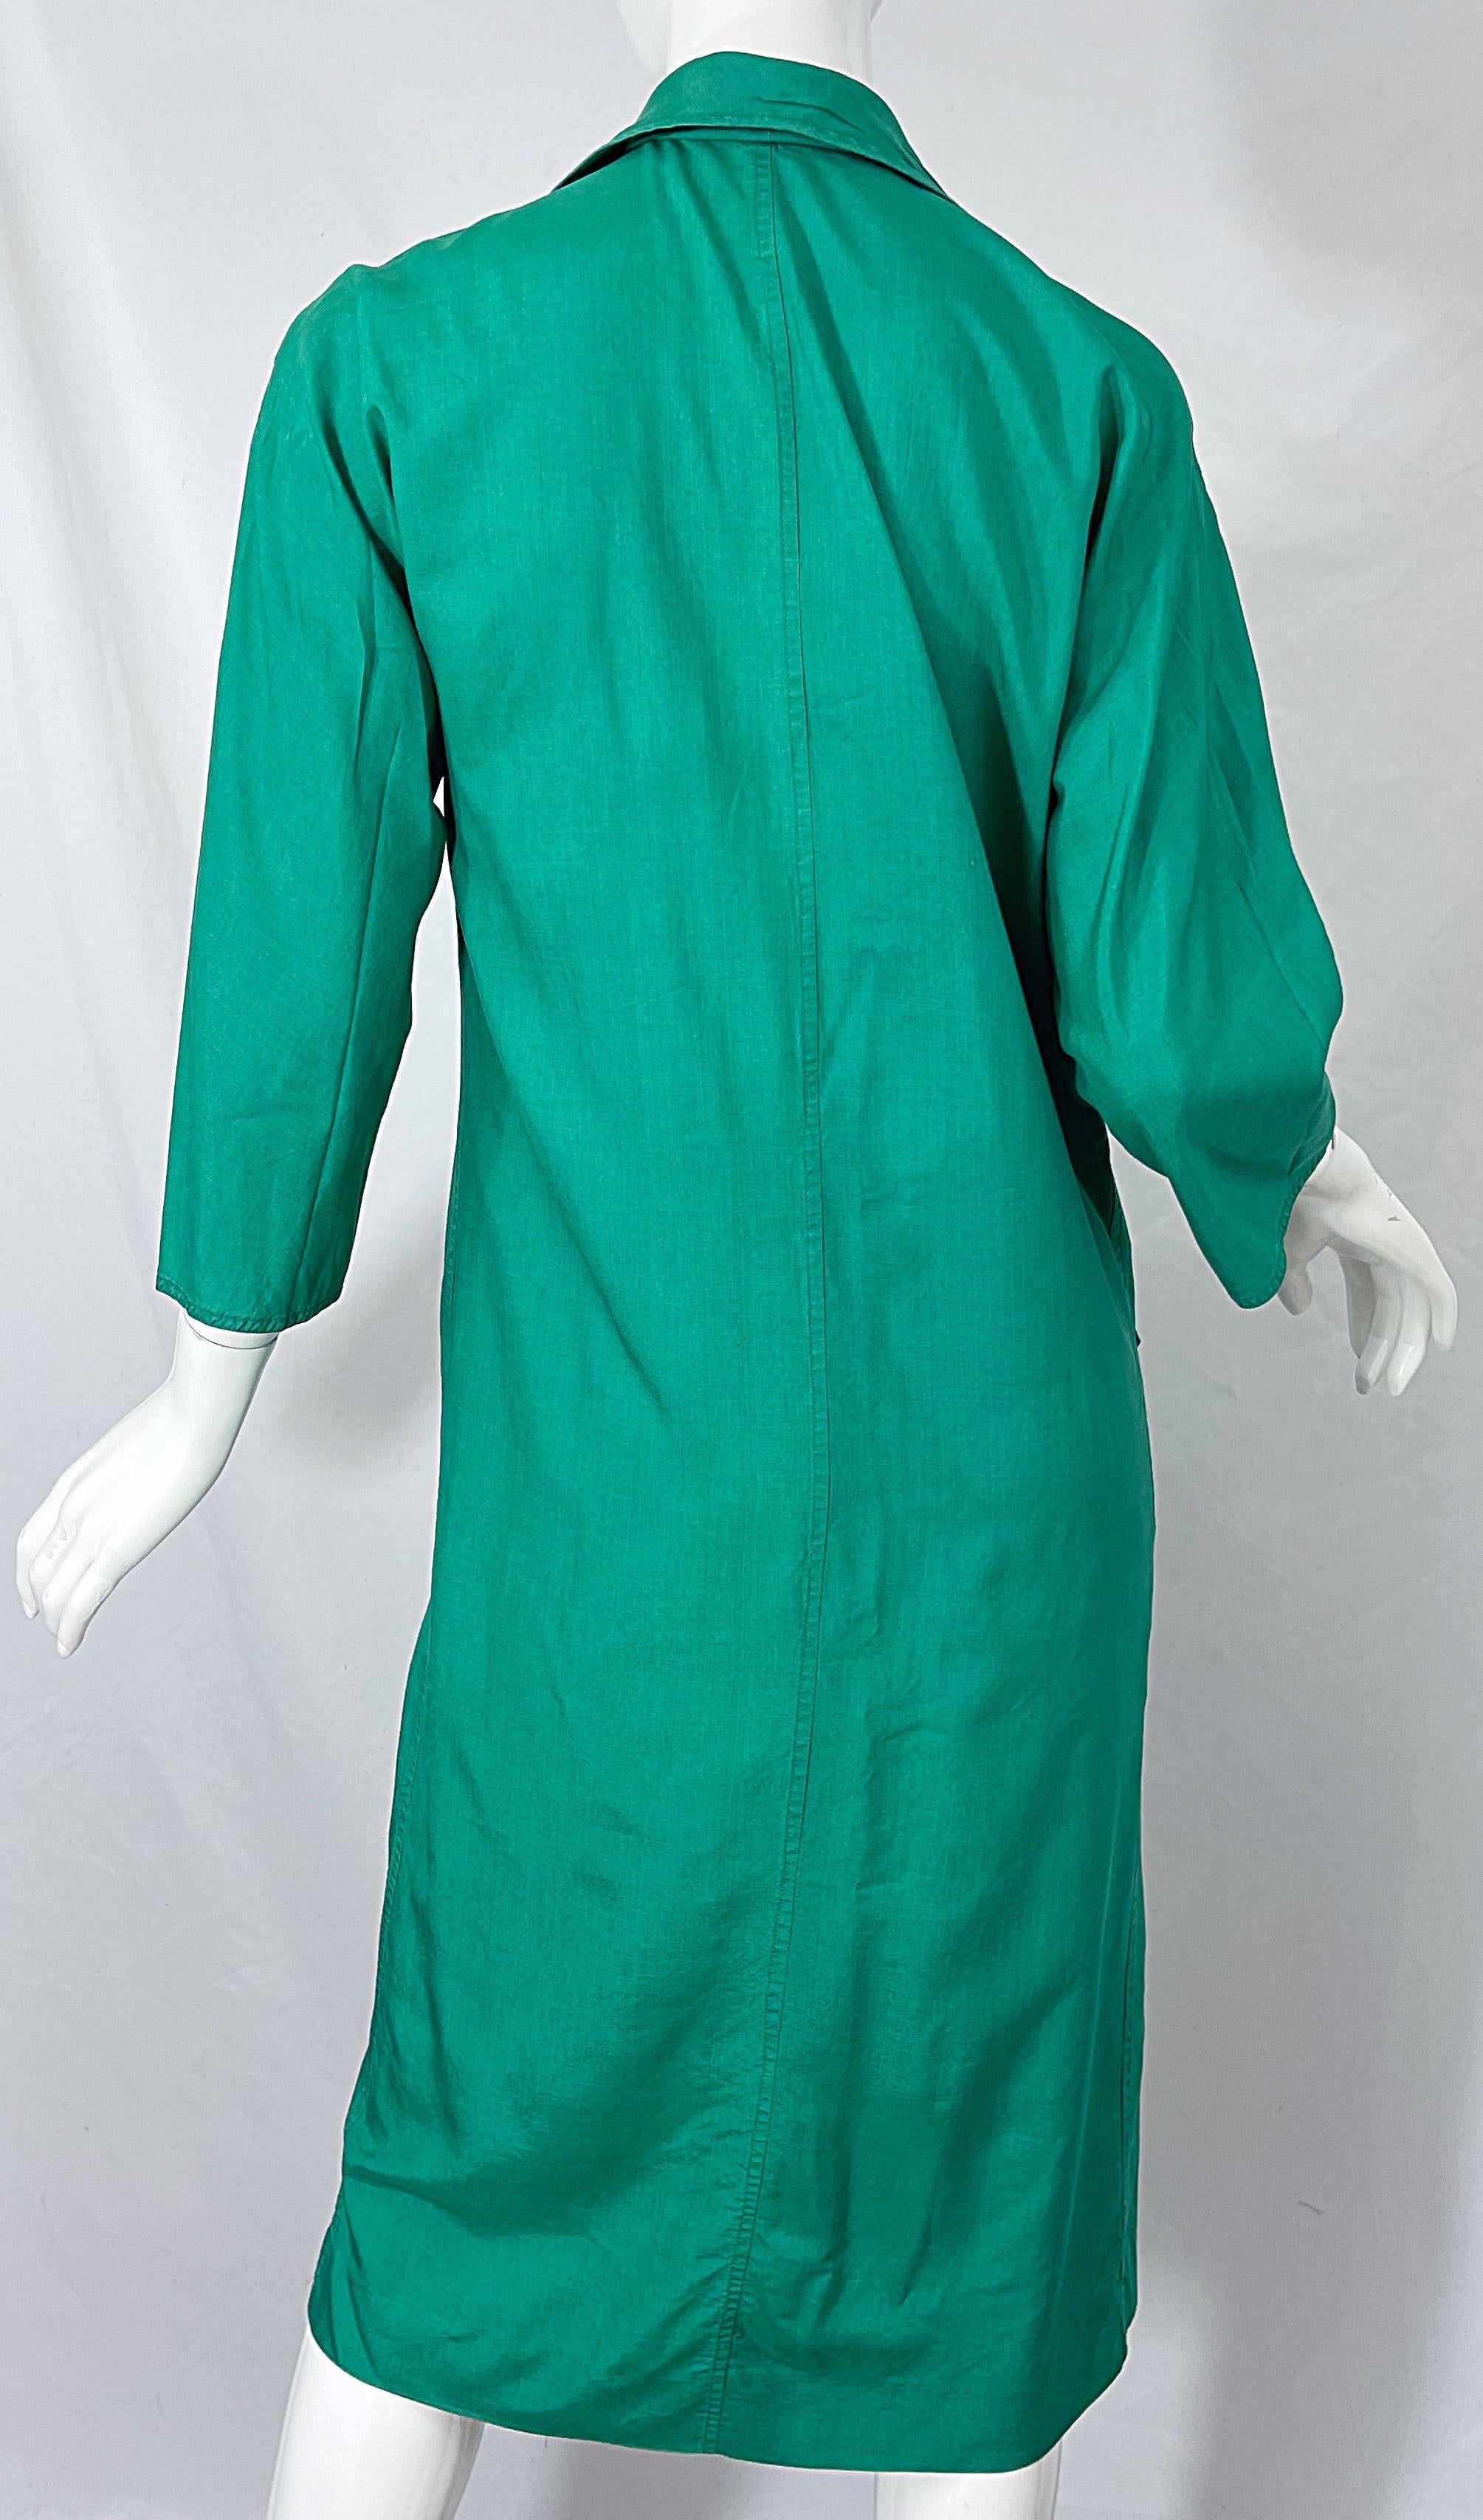 1970s Halston Kelly Green Silk 3/4 Sleeves Vintage 70s Shirt Dress w/ Pockets For Sale 1